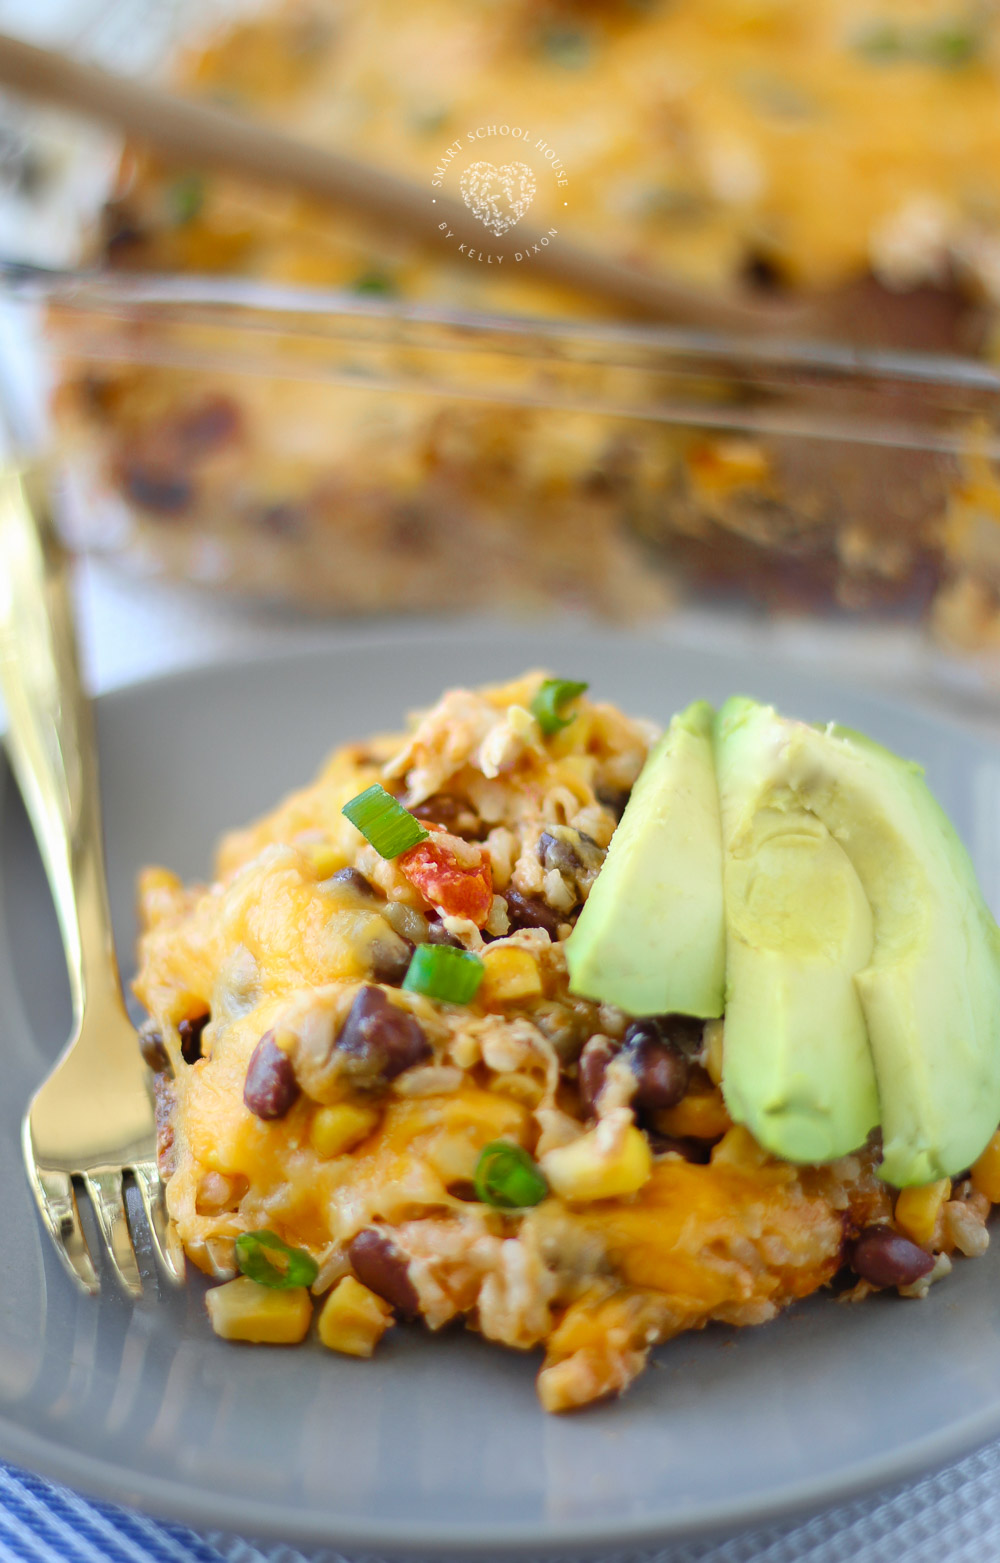 30 Minute Mexican Chicken and Rice Dinner Recipe – an easy and delicious meal! This dinner recipe is made in one baking dish.